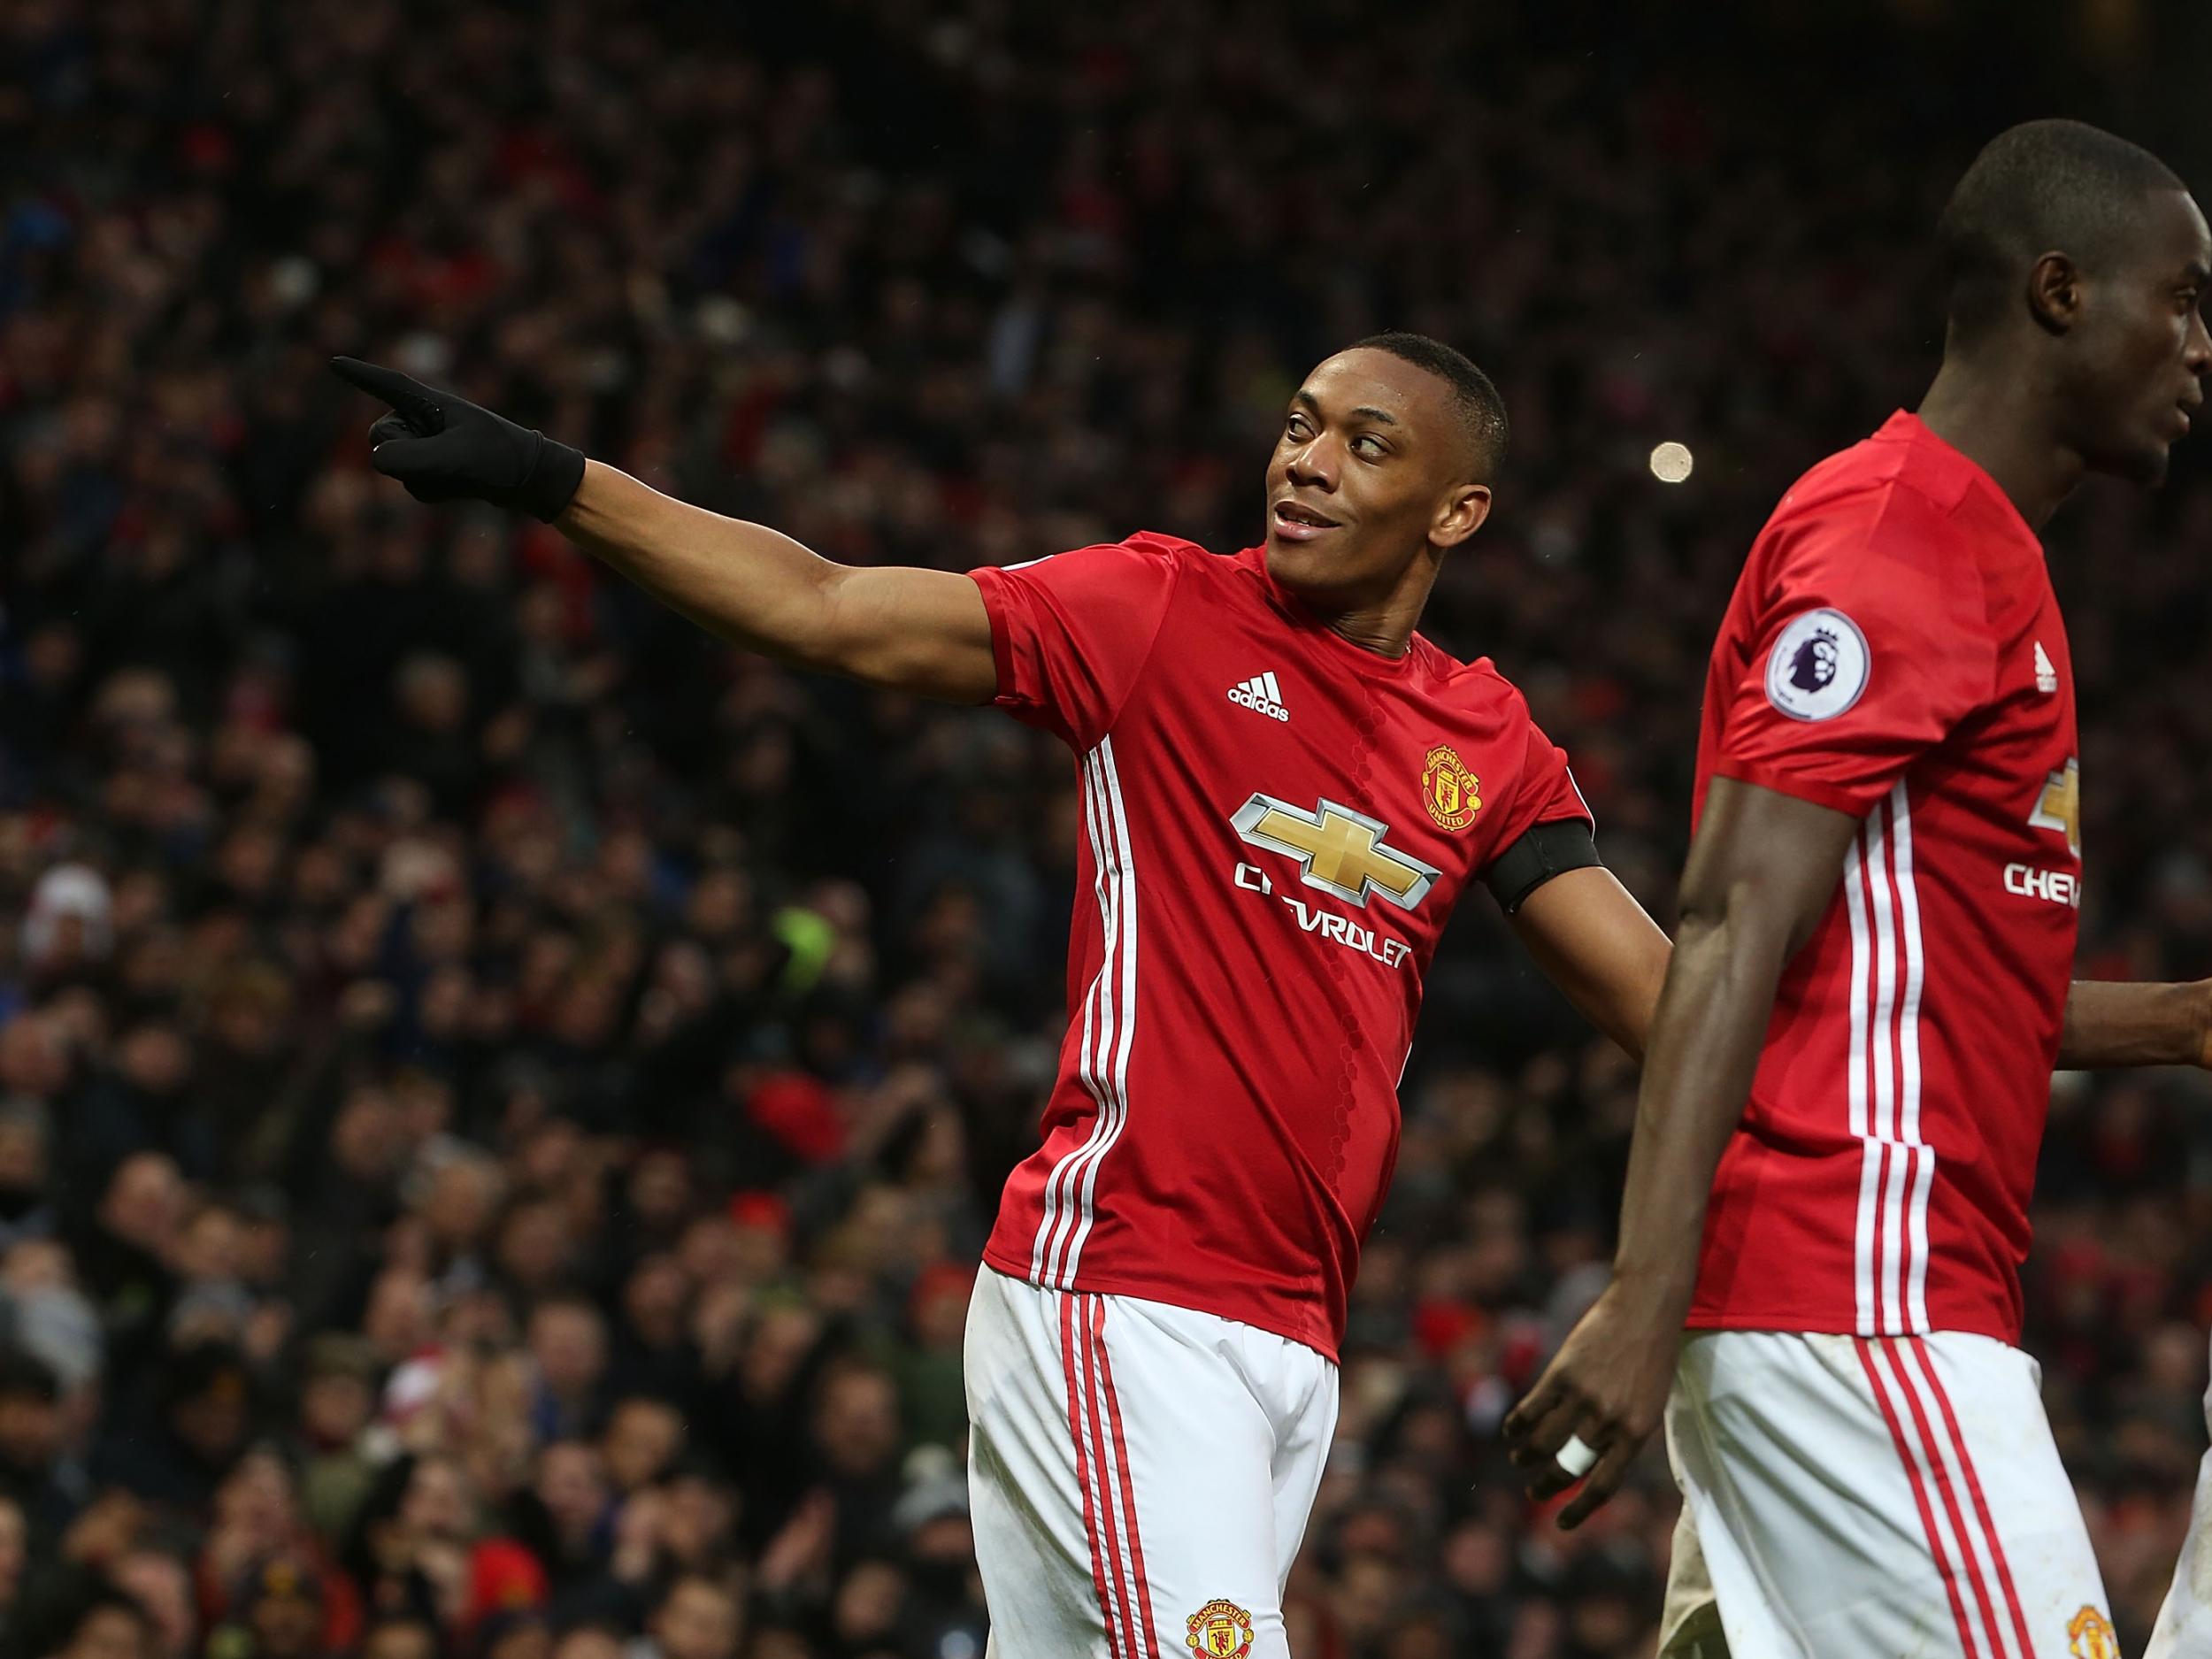 Martial scored a fine second goal for United against Watford